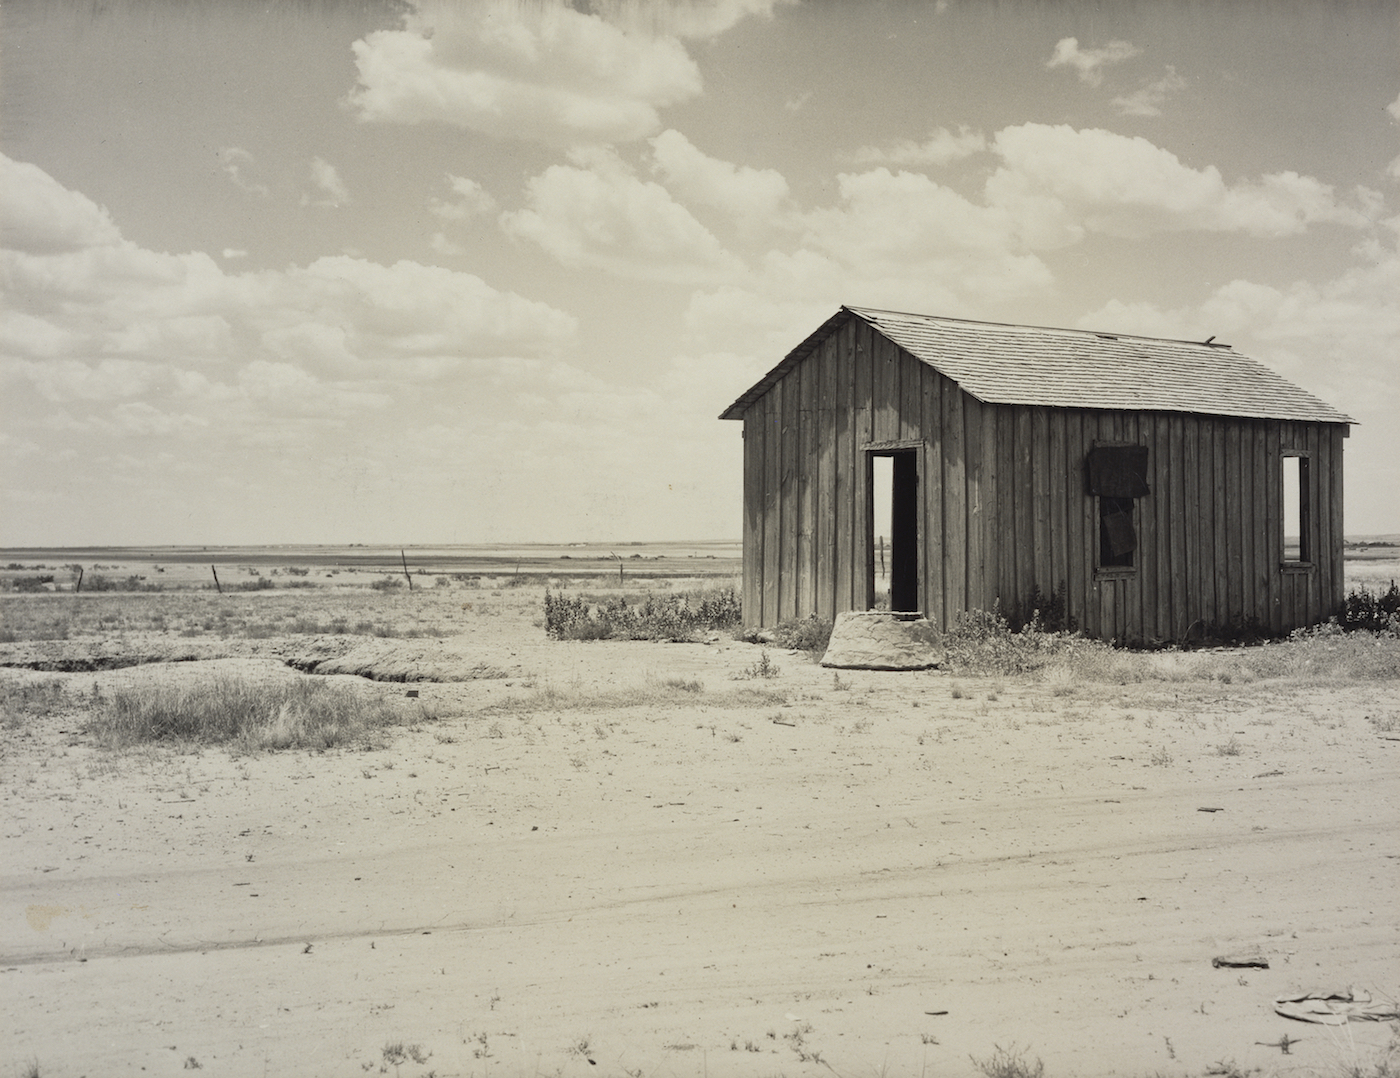 abandoned home in dust bowl in oklahoma